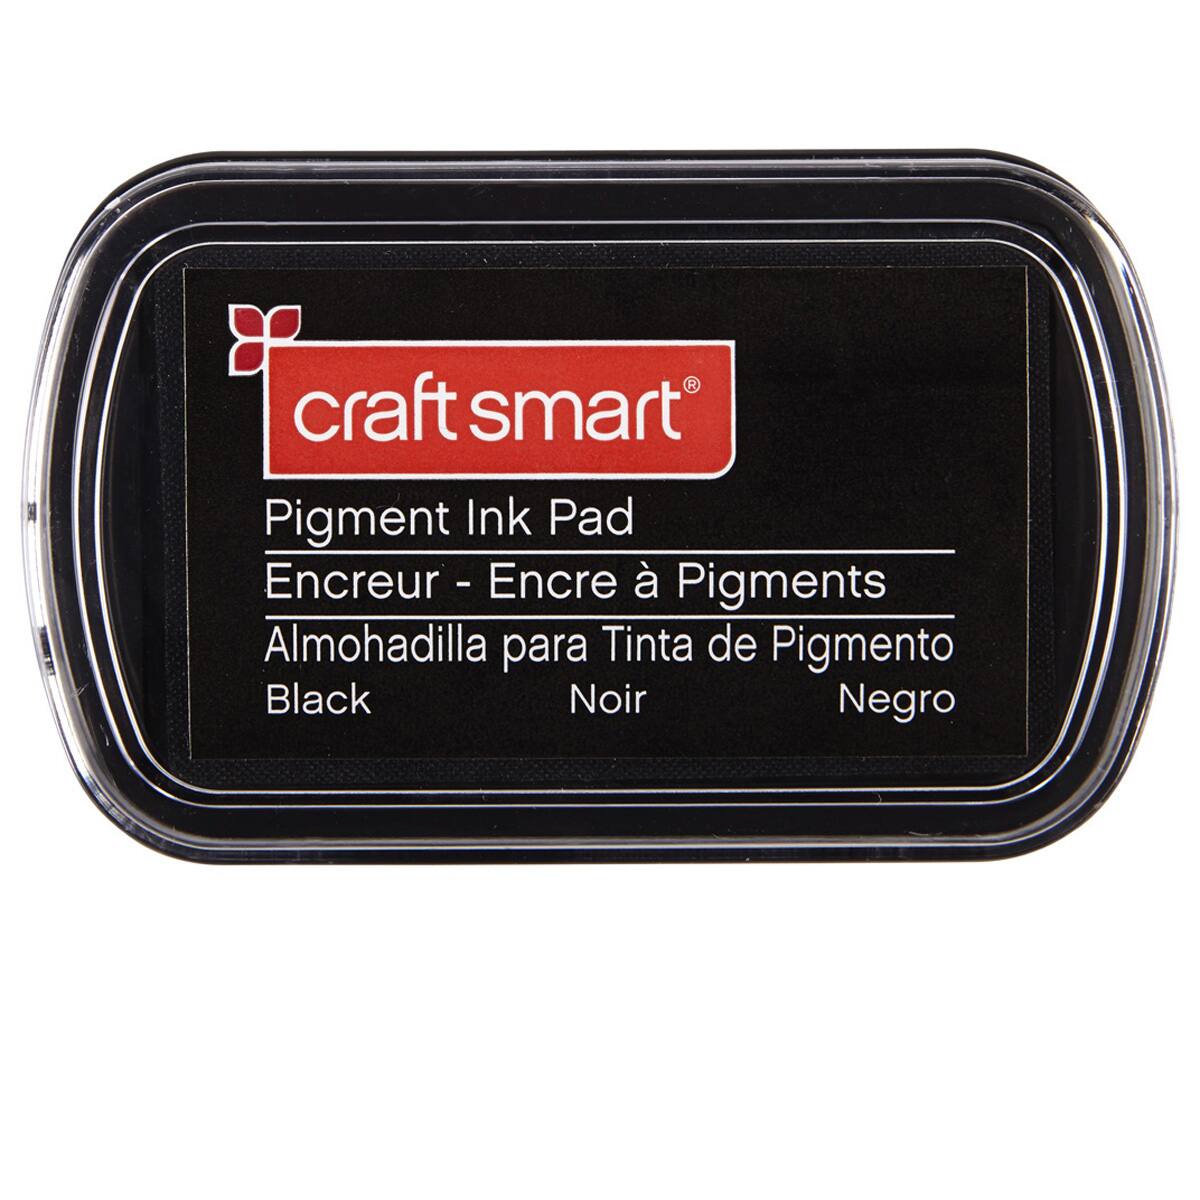 Pigment Ink Pad by Craft Smart®